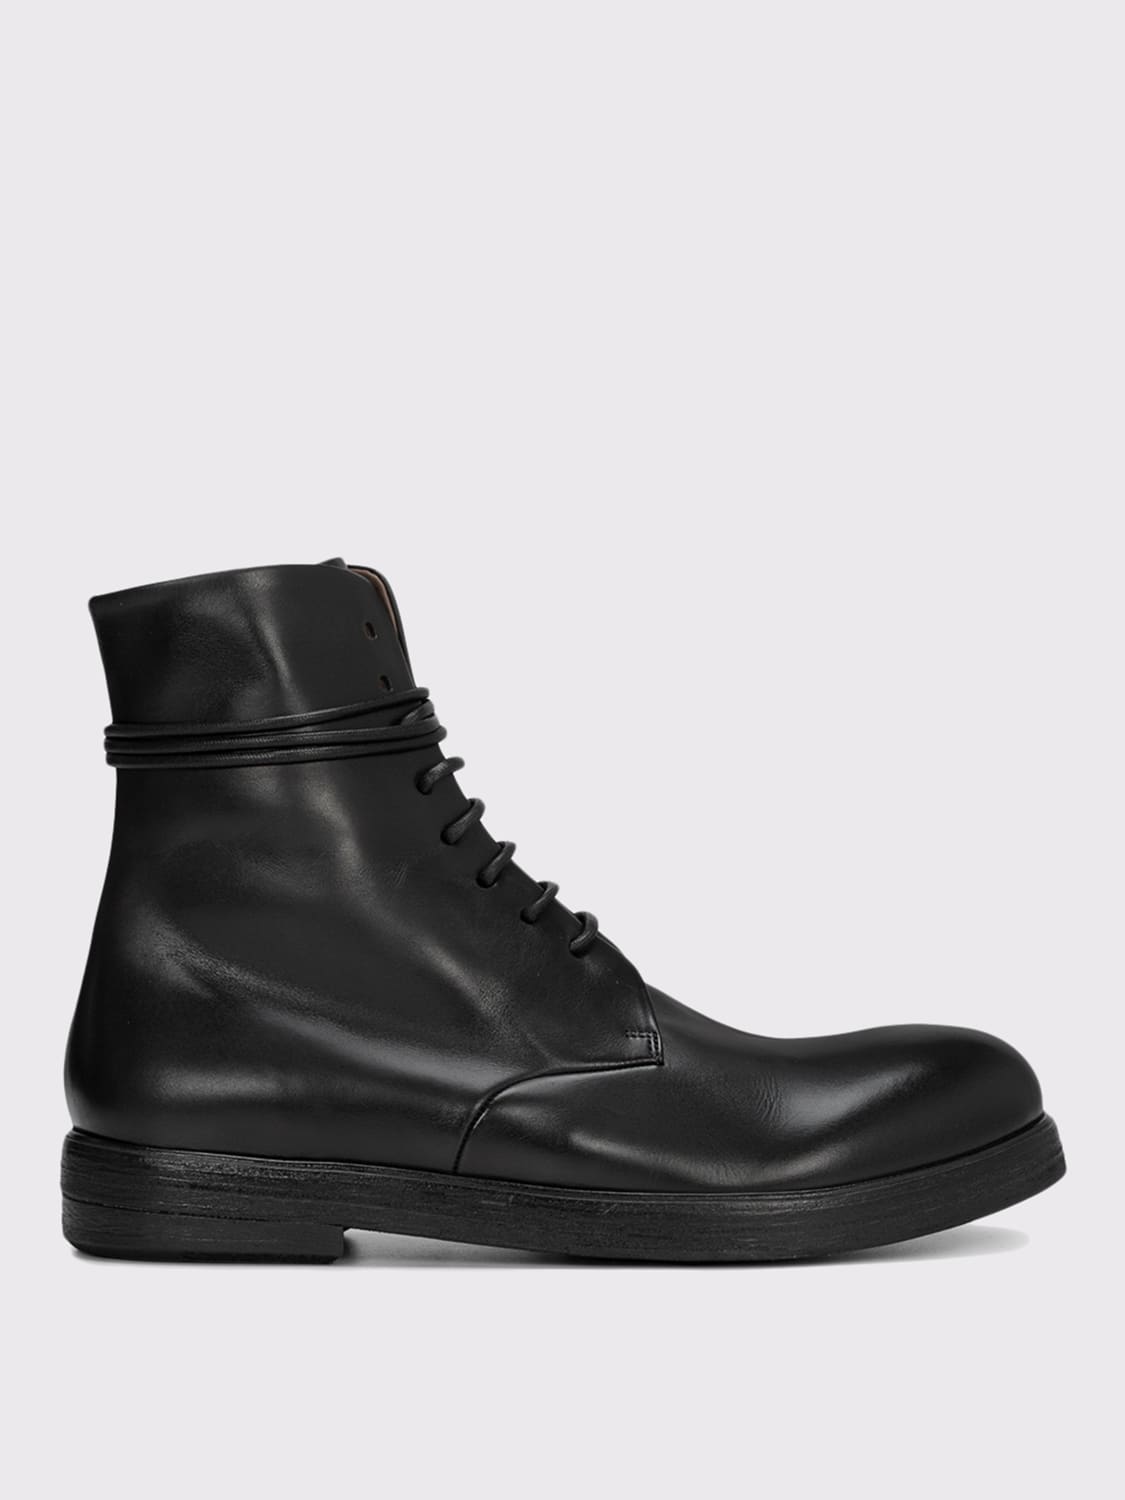 MARSÈLL: Zucca Wedge ankle boot in leather - Black | Marsèll boots ...